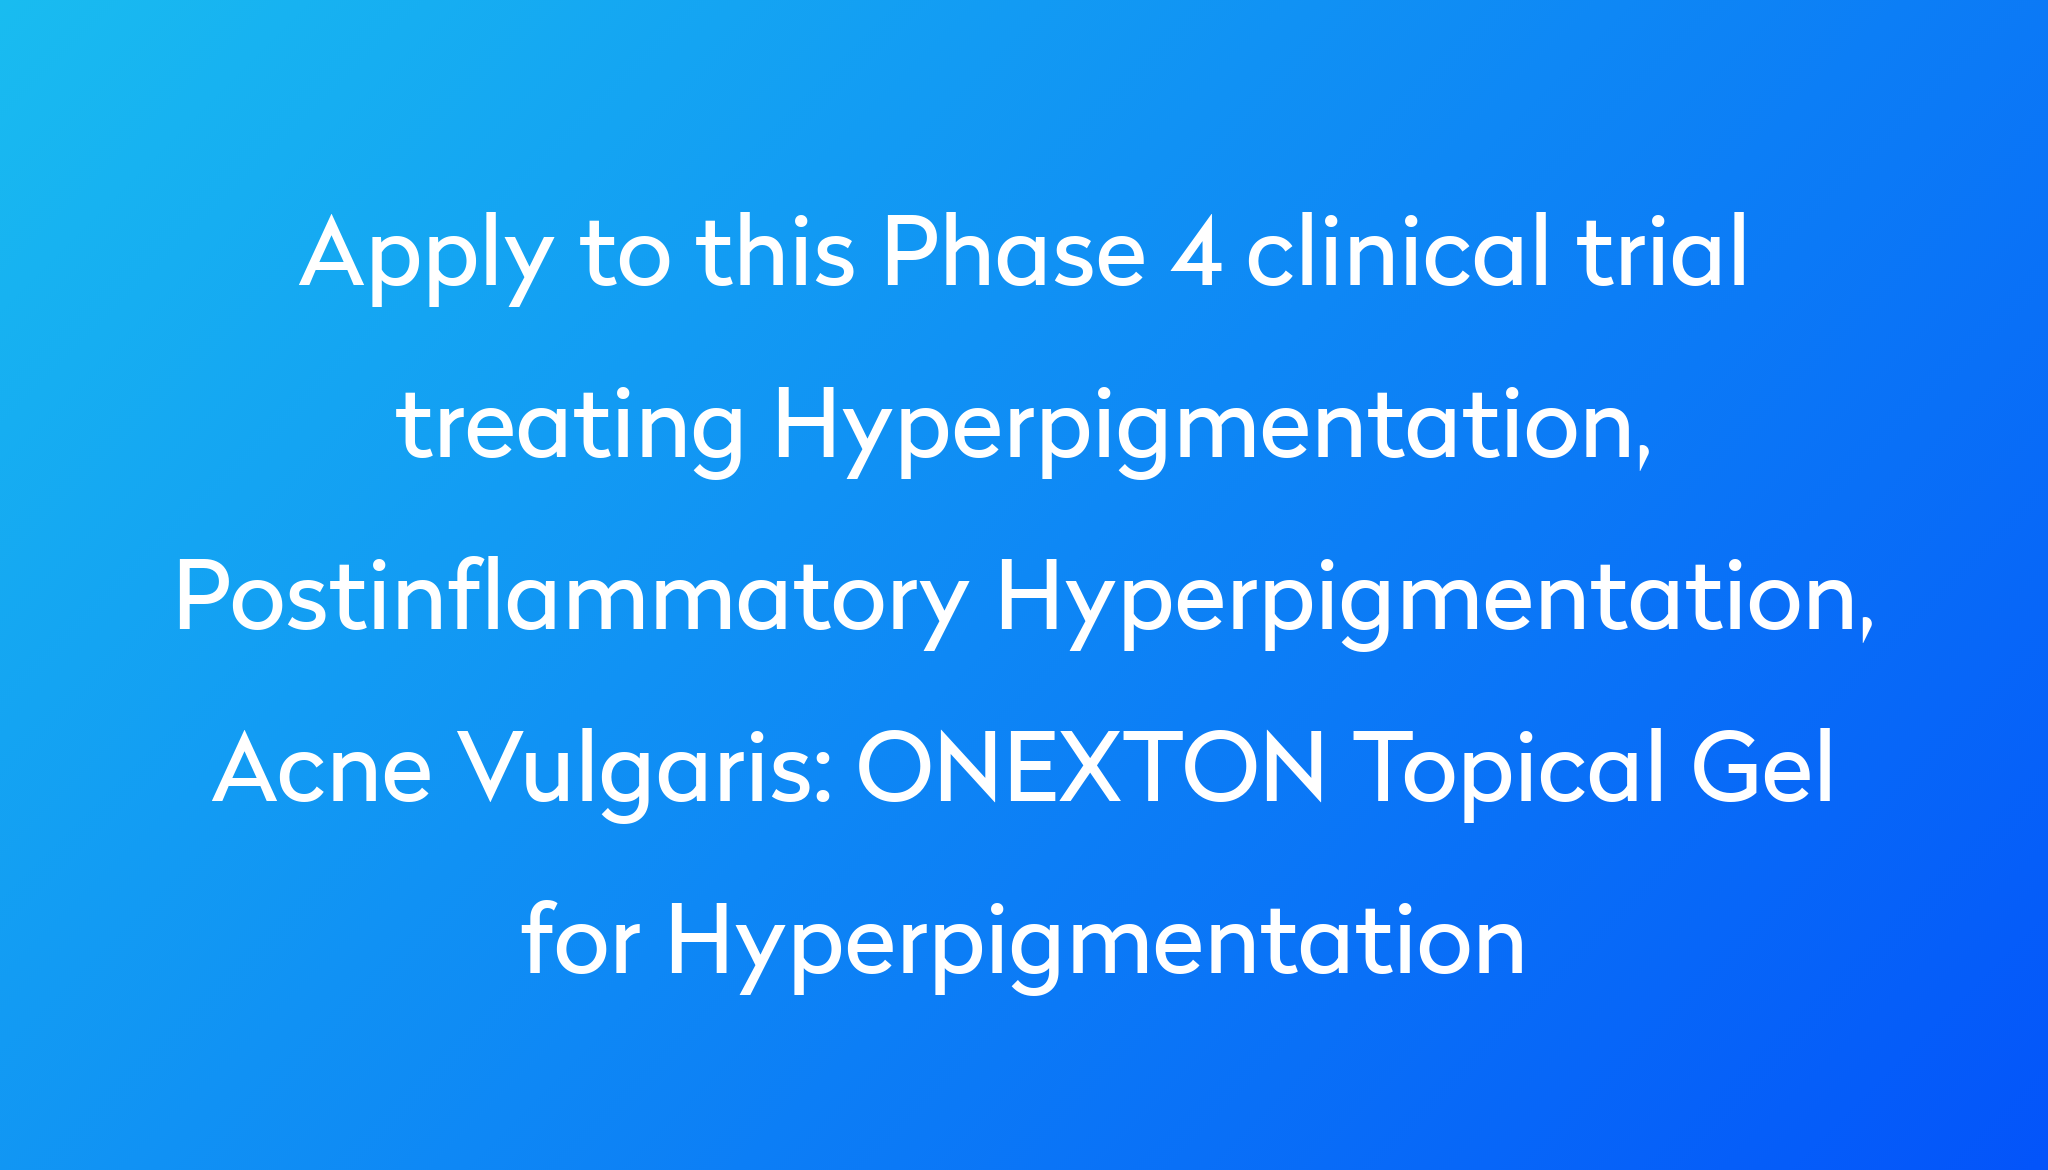 ONEXTON Topical Gel for Hyperpigmentation Clinical Trial Power